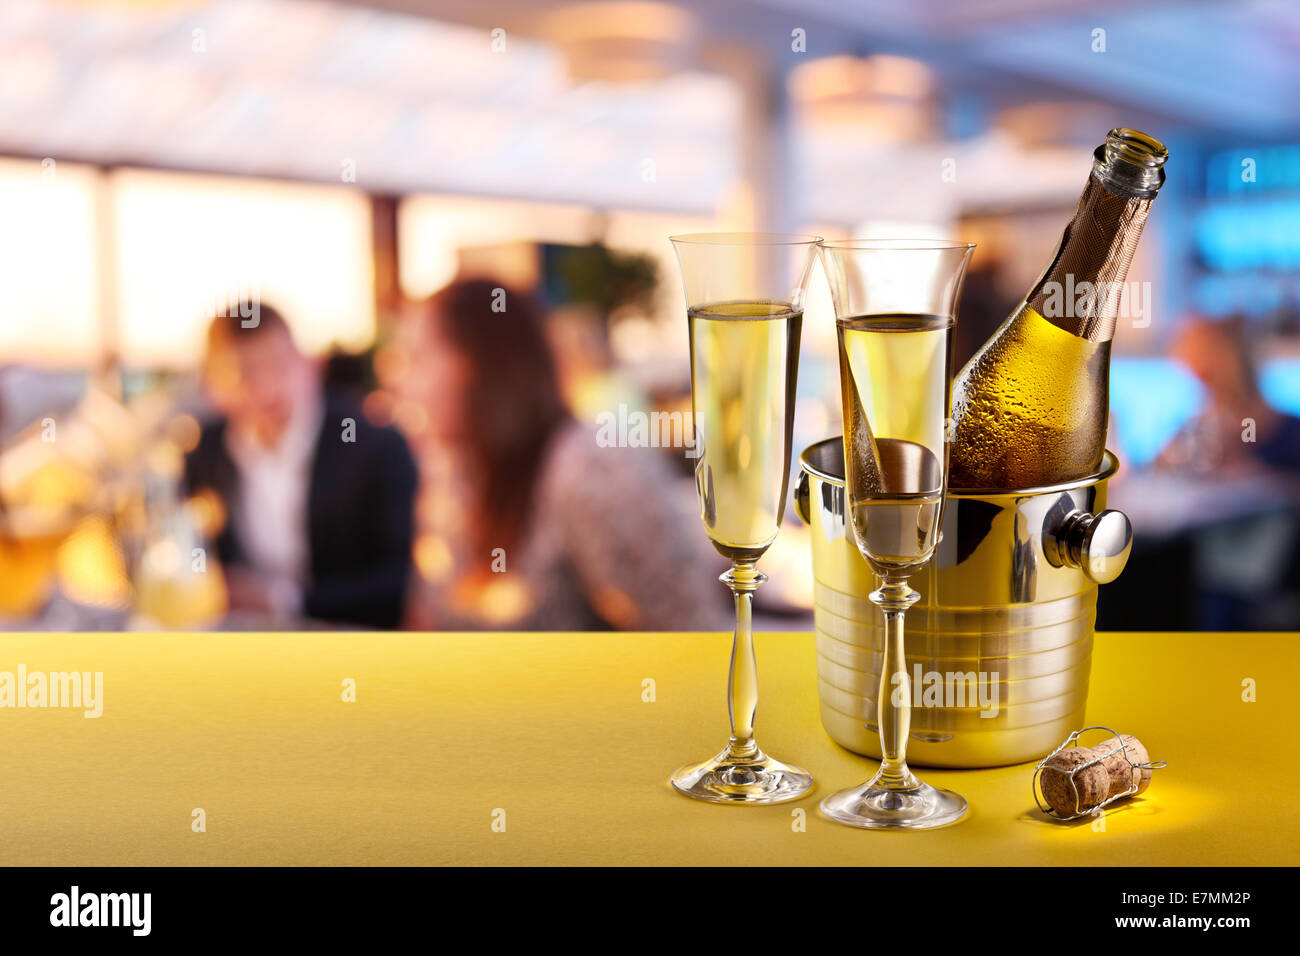 Champagne flutes and chilled bottle at the bar counter. Stock Photo